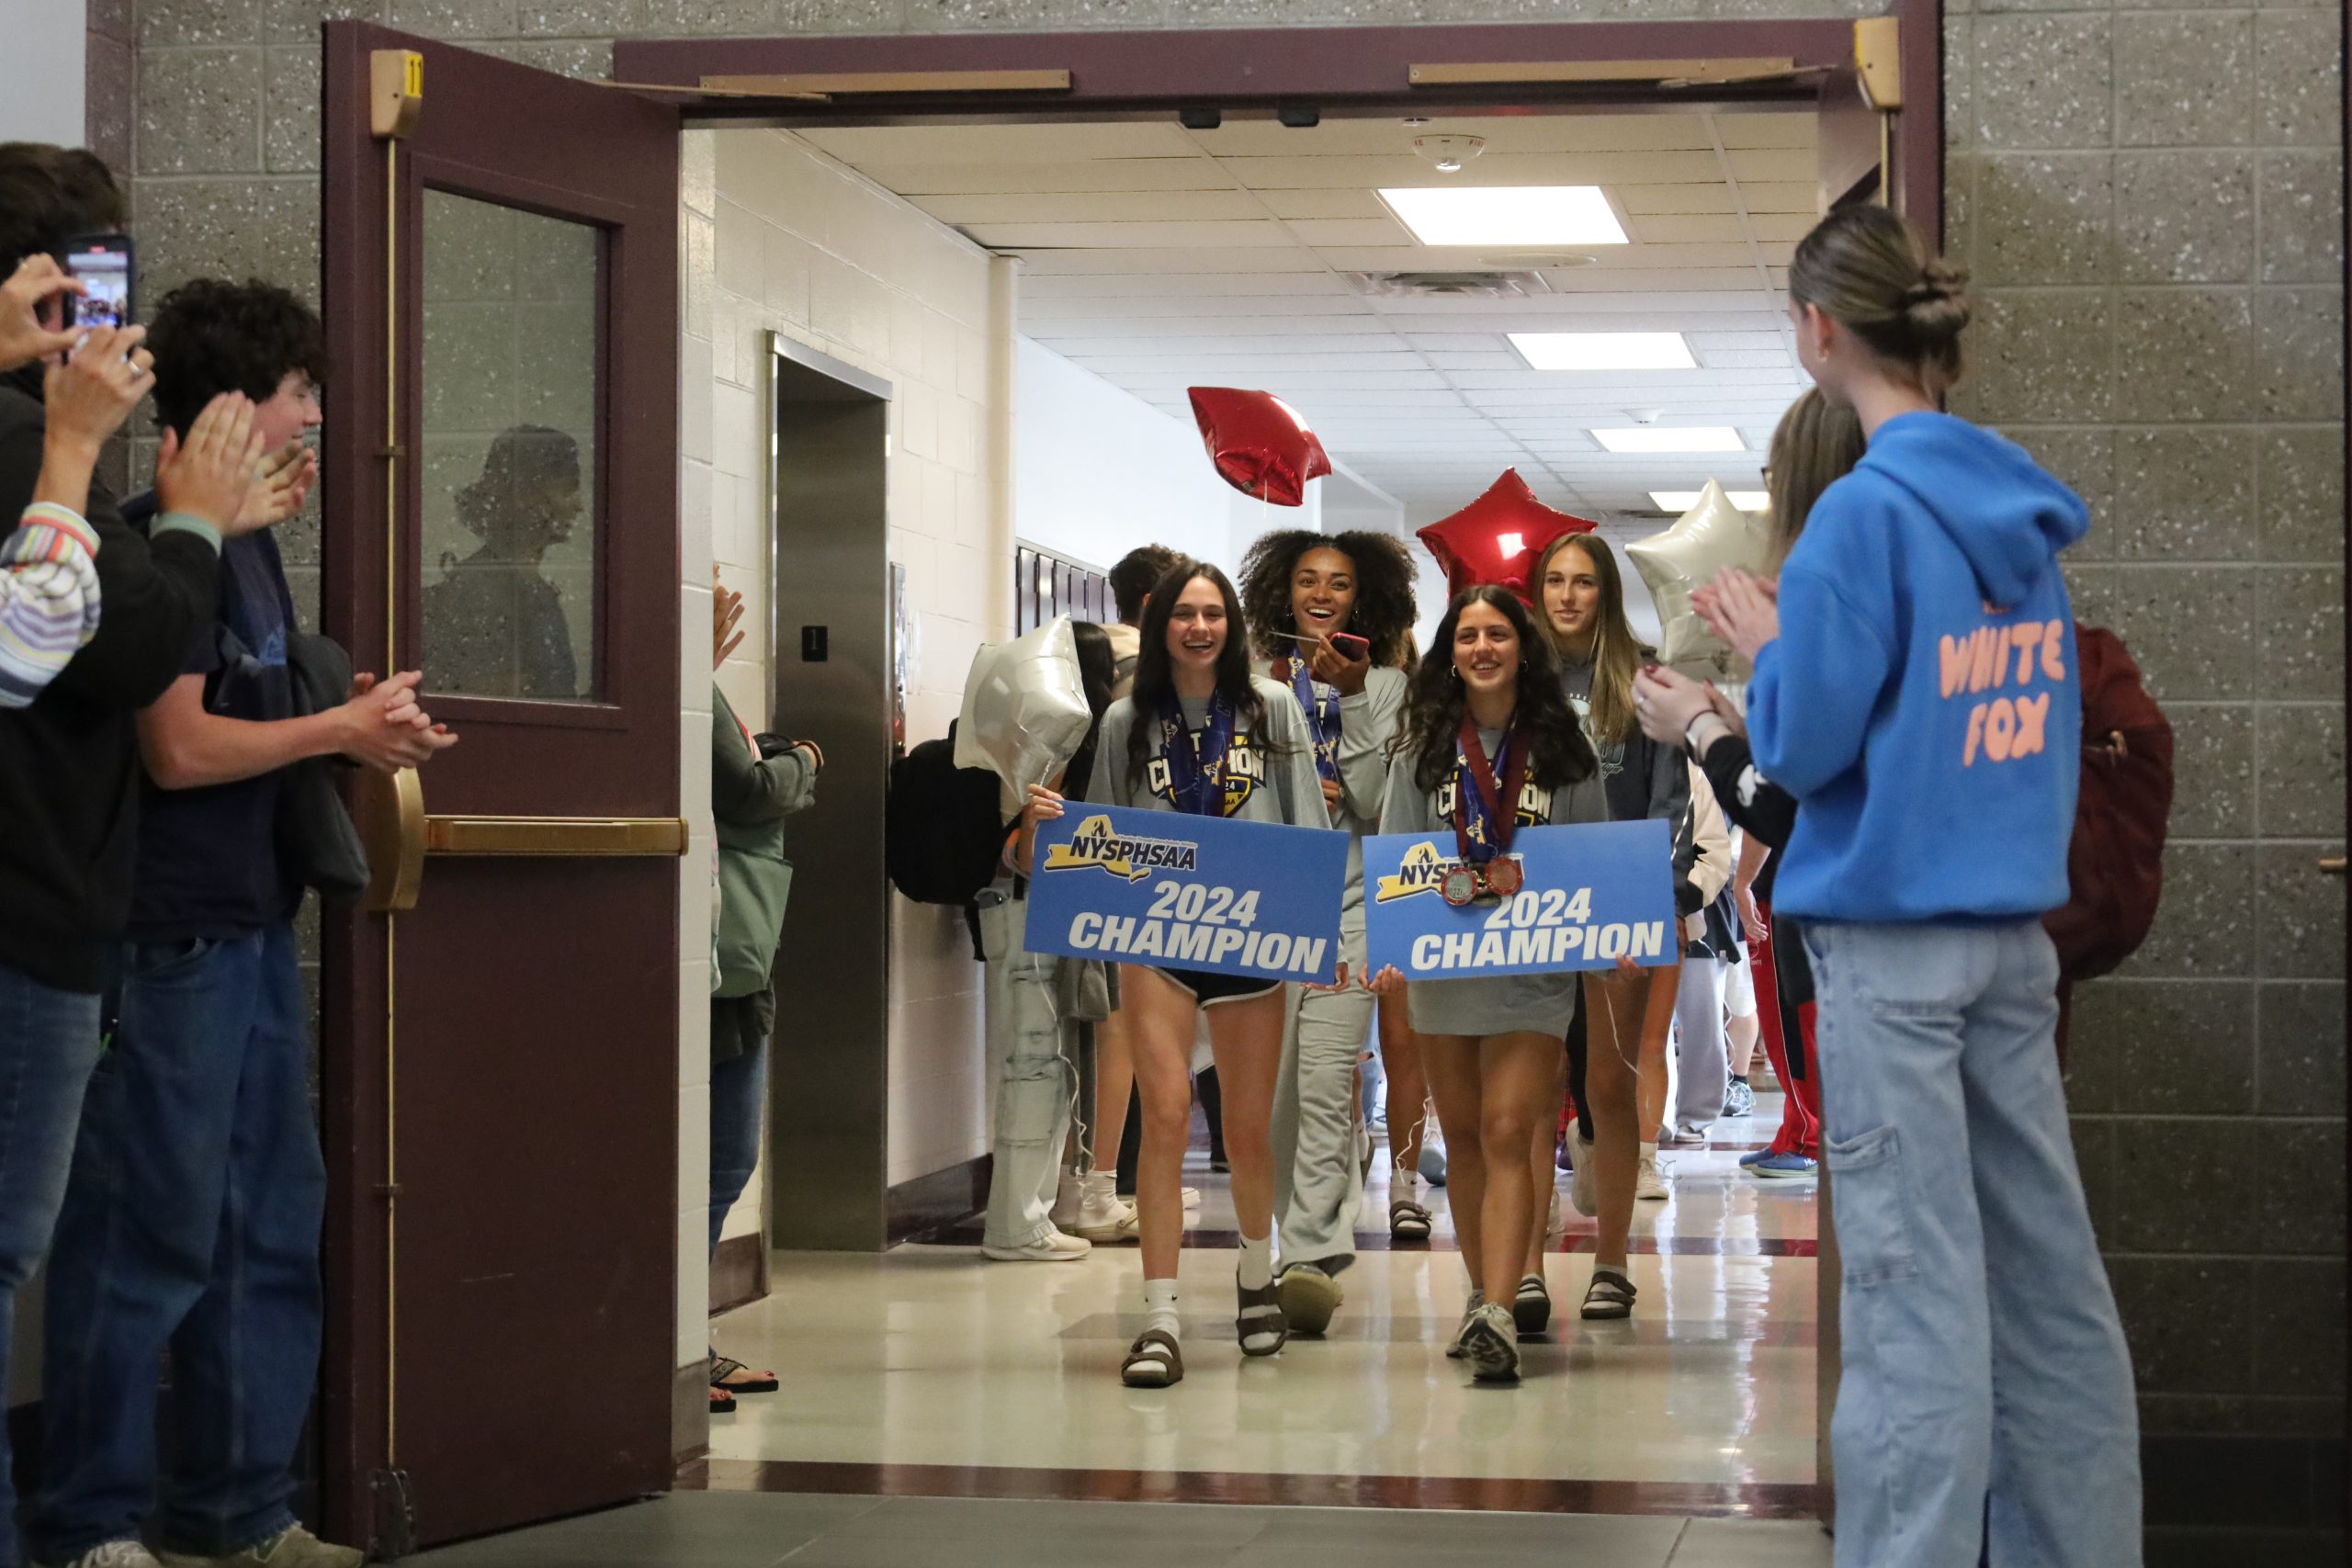 Track and field athletes walk the halls of GHS holding signs and balloons. Students are lining the halls, applauding